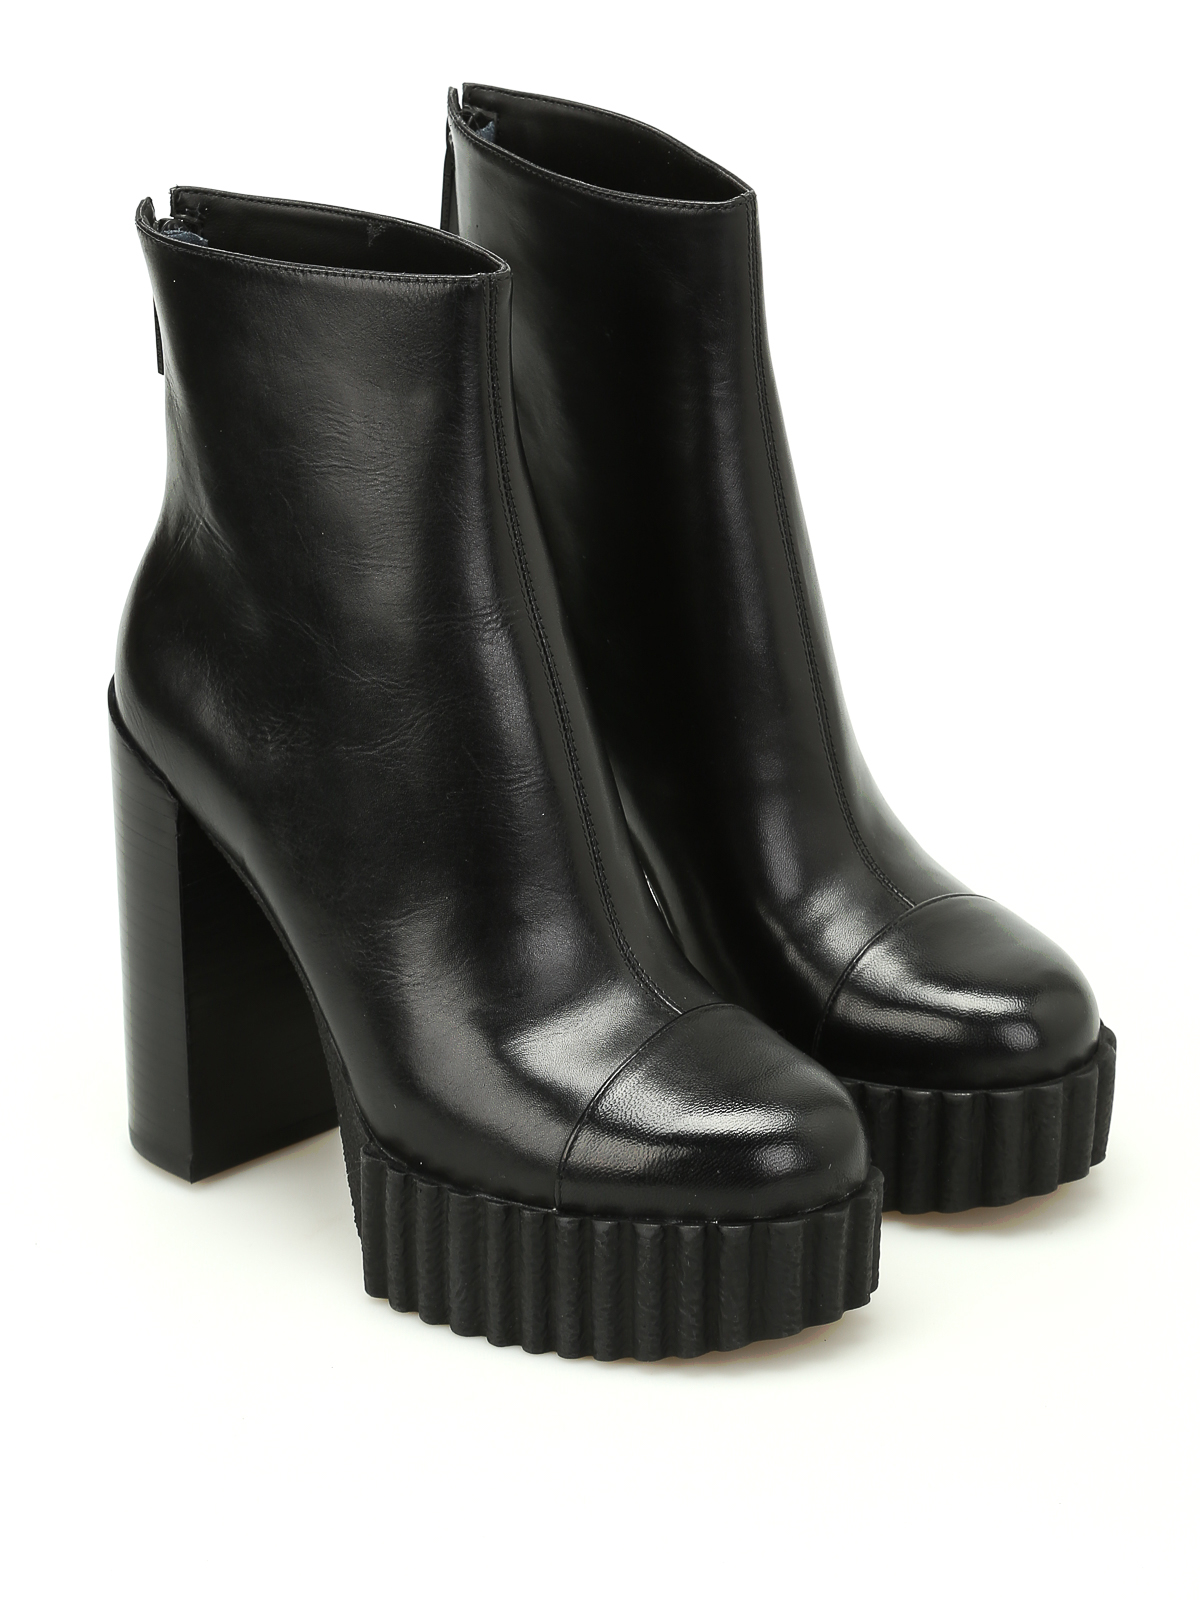 voertuig Atletisch Smaak Ankle boots Kendall + Kylie - Cadence leather ankle boots - KKCADENCEB